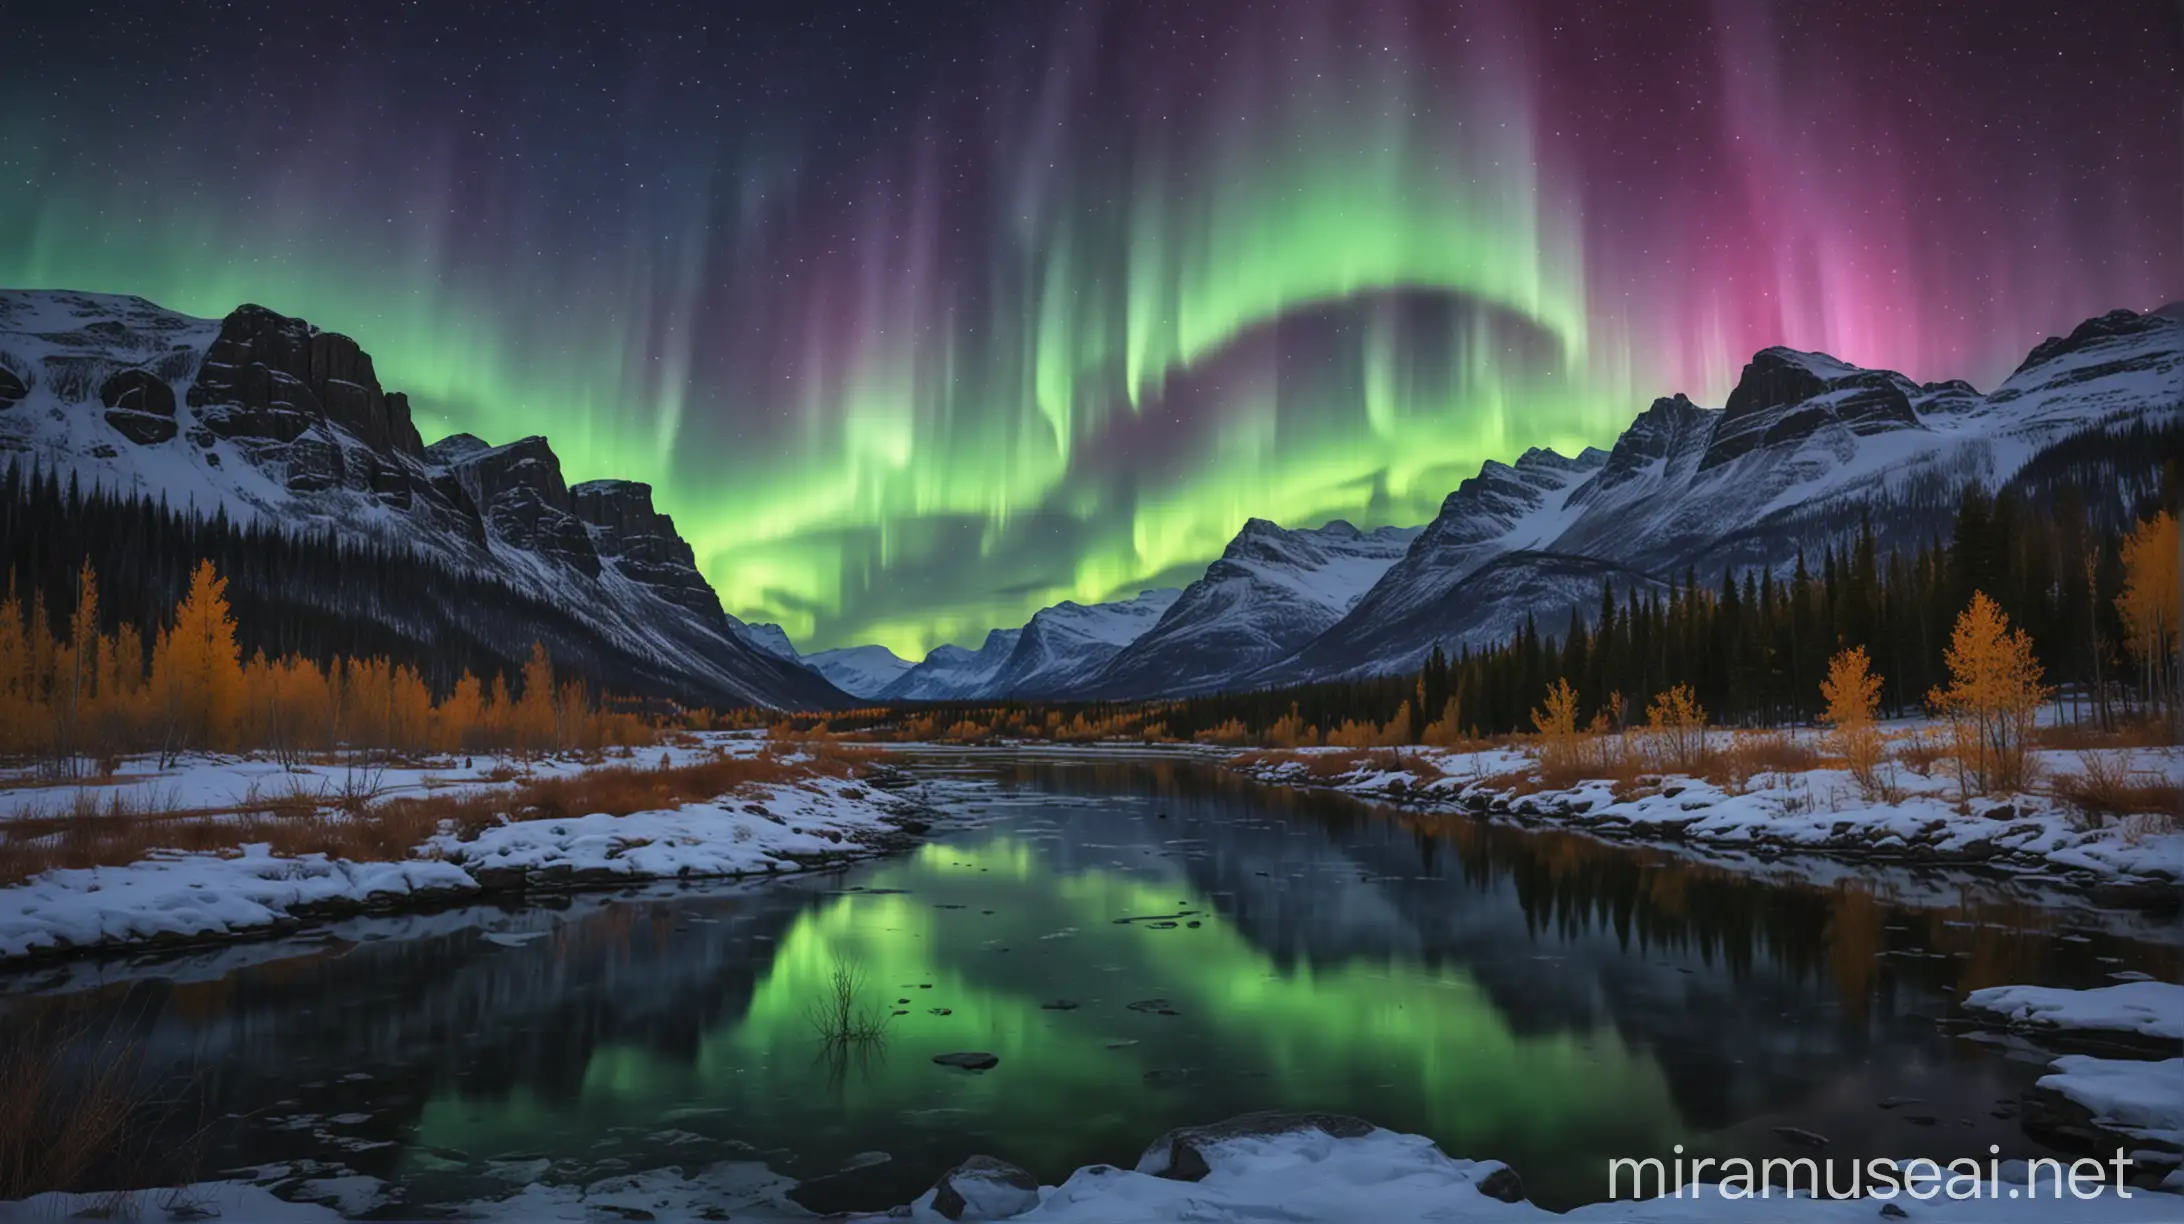 Mesmerizing Aurora Borealis Over Vibrant River and Tranquil Skies